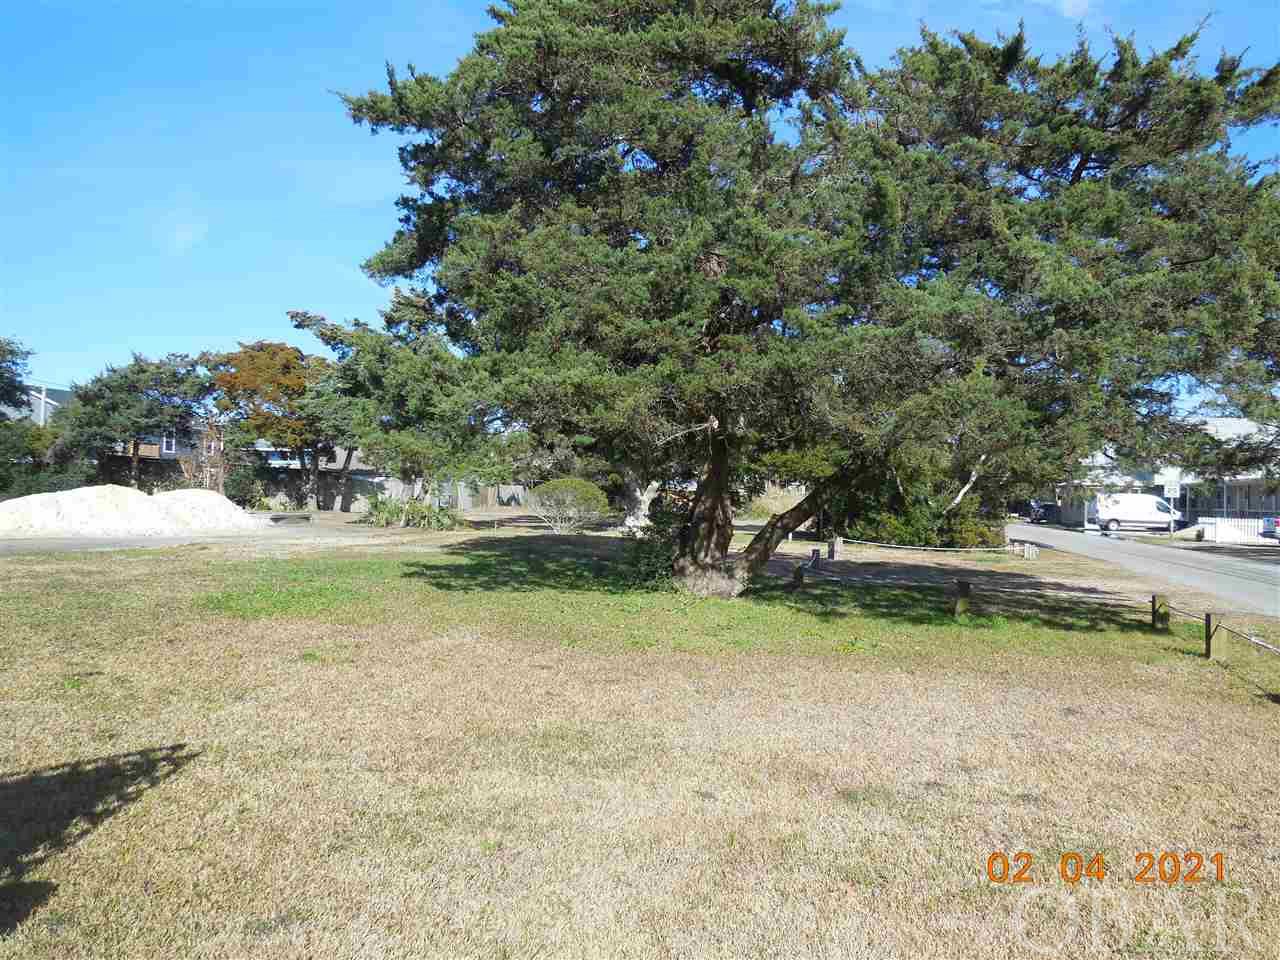 A 5,330 sq. ft. corner lot in Live Oak Village, a new 7 lot subdivision in the heart of Ocracoke Island. Walking distance to great restaurants, shops, galleries, Silver Lake harbor and The Ocracoke Coffee Shop. Conveys with a 4 bedroom septic permit and a 4 bedroom water meter. Restrictive covenants in place to retain the historical charm and quaintness of Ocracoke Village. Start planning your Ocracoke dream house! Taxes are an estimate only. Currently being taxed as one large parcel.